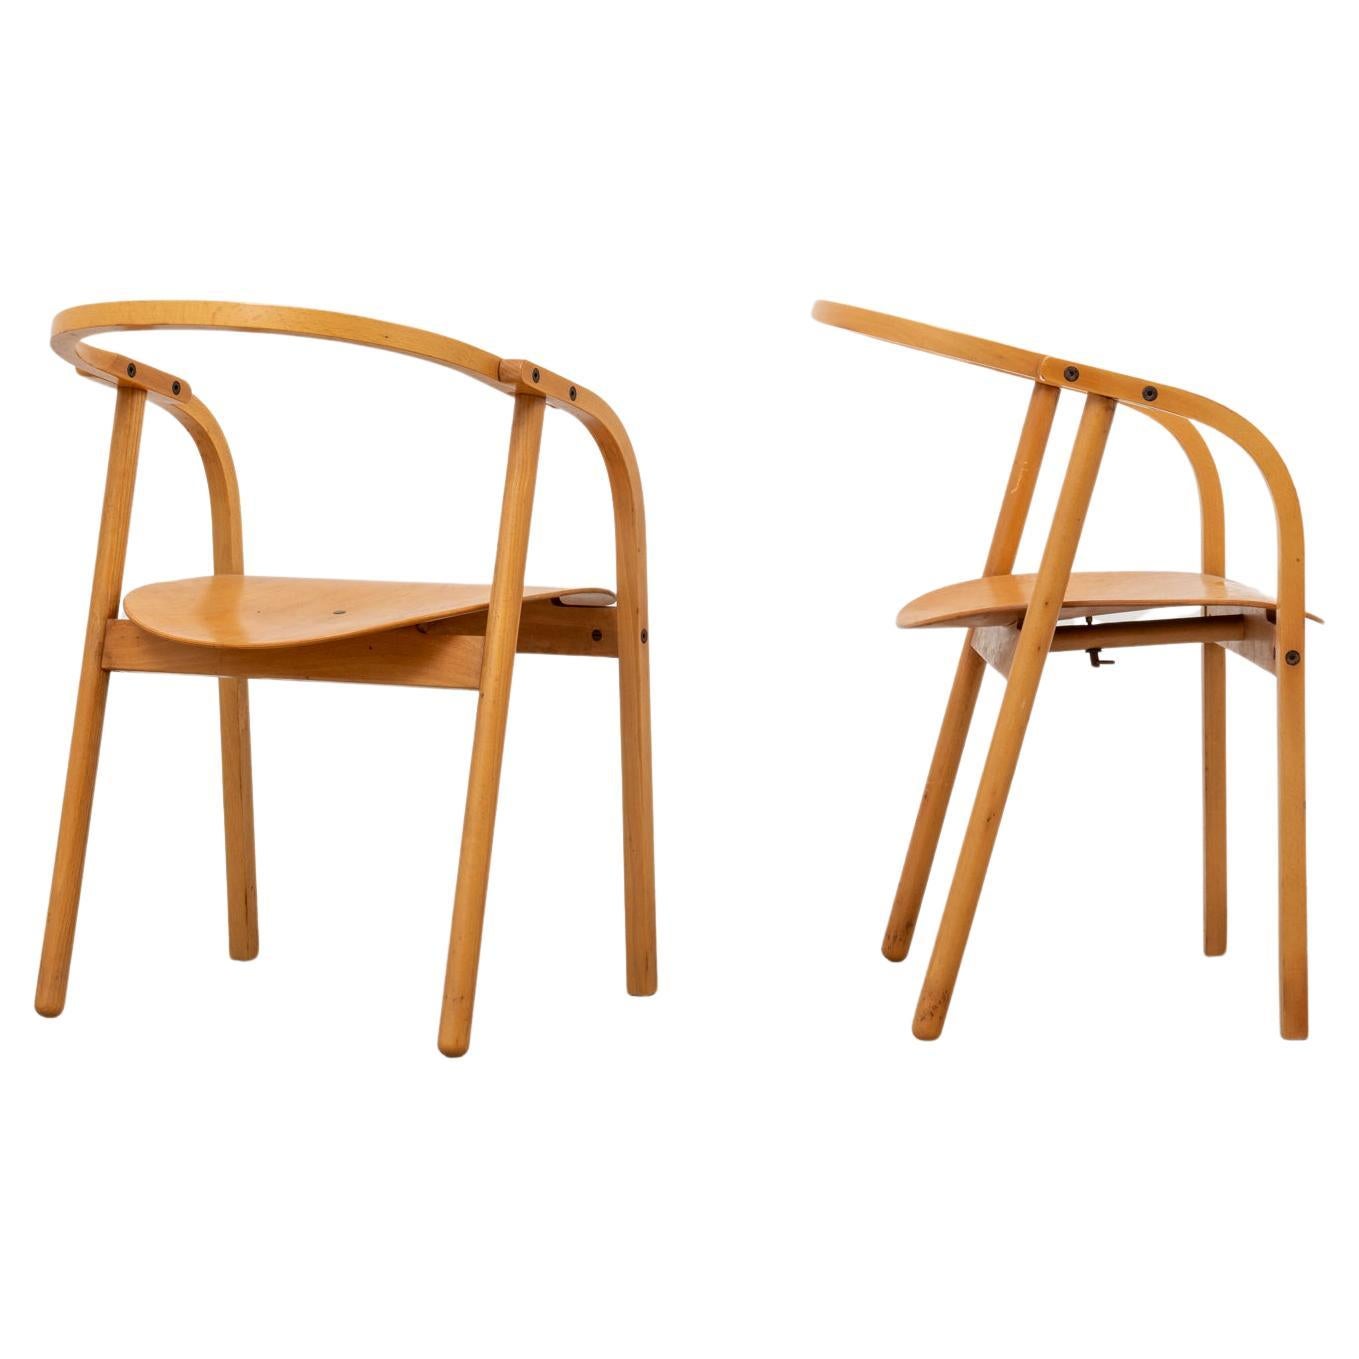 4 “Otto” Organic Wood Armchairs by Werther Toffoloni & Piero Palange for Ibis 